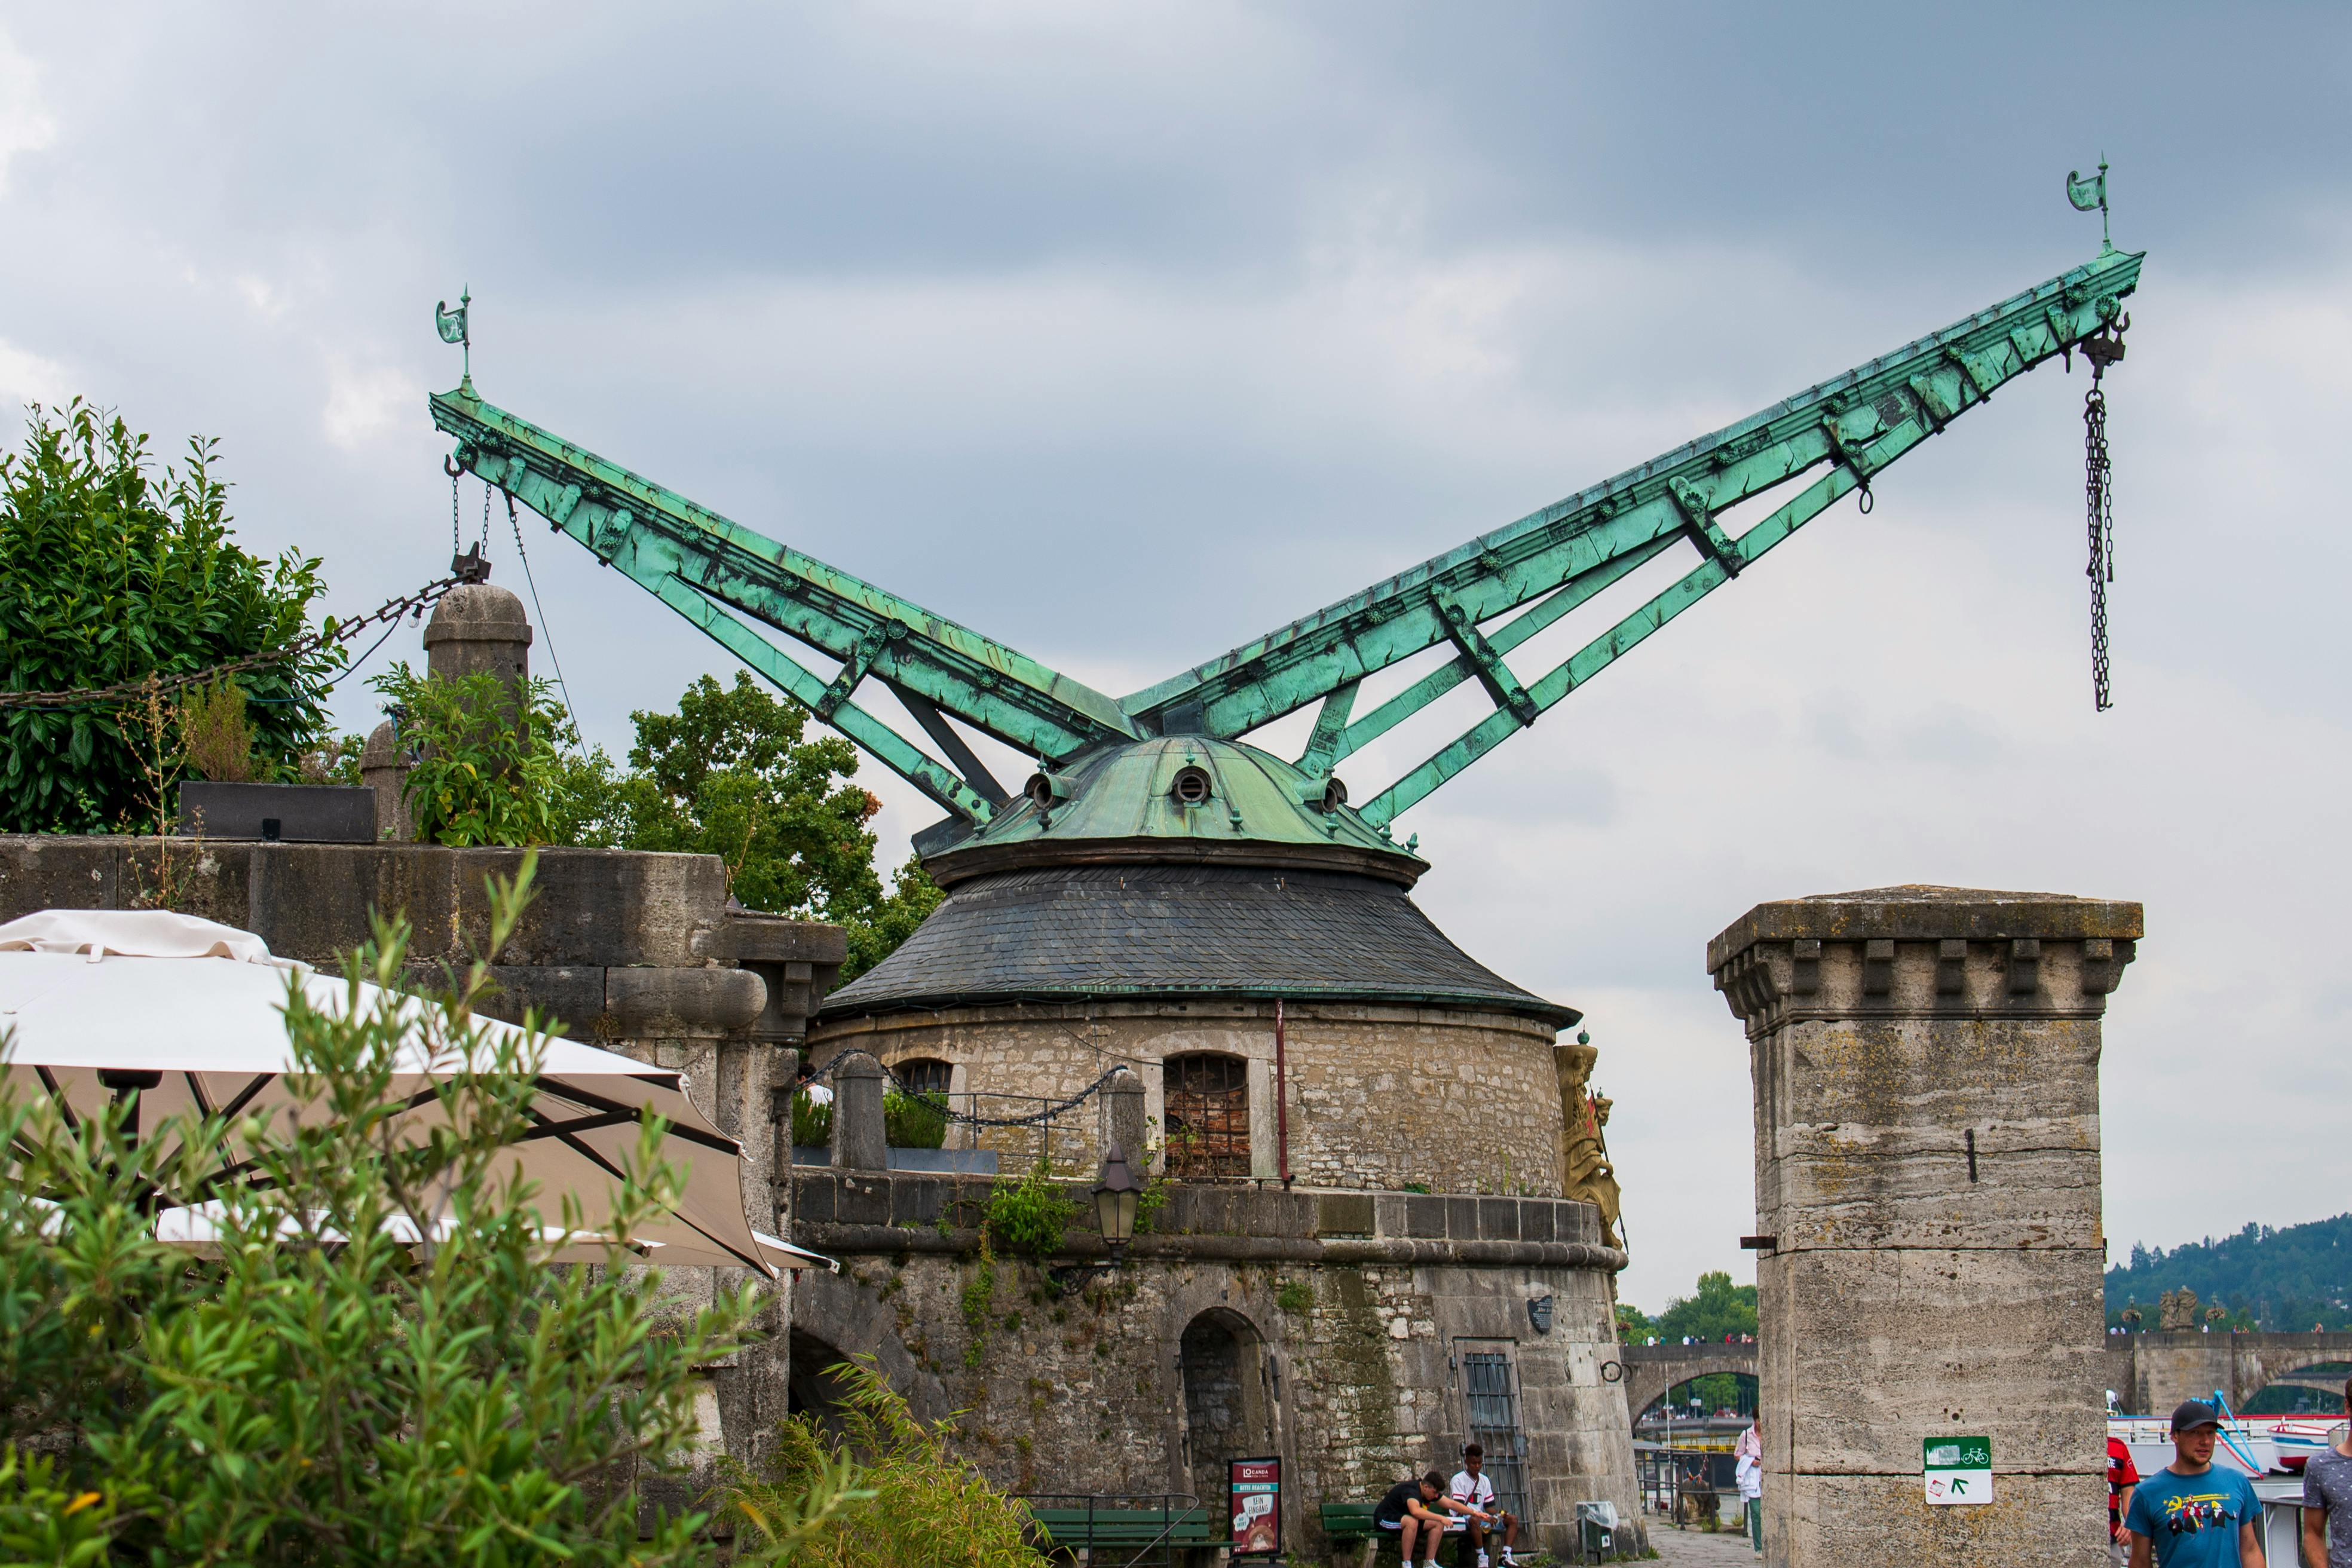 green copper vintage old crane by the main river in the old part of town wurzburg on a sunny day in summer